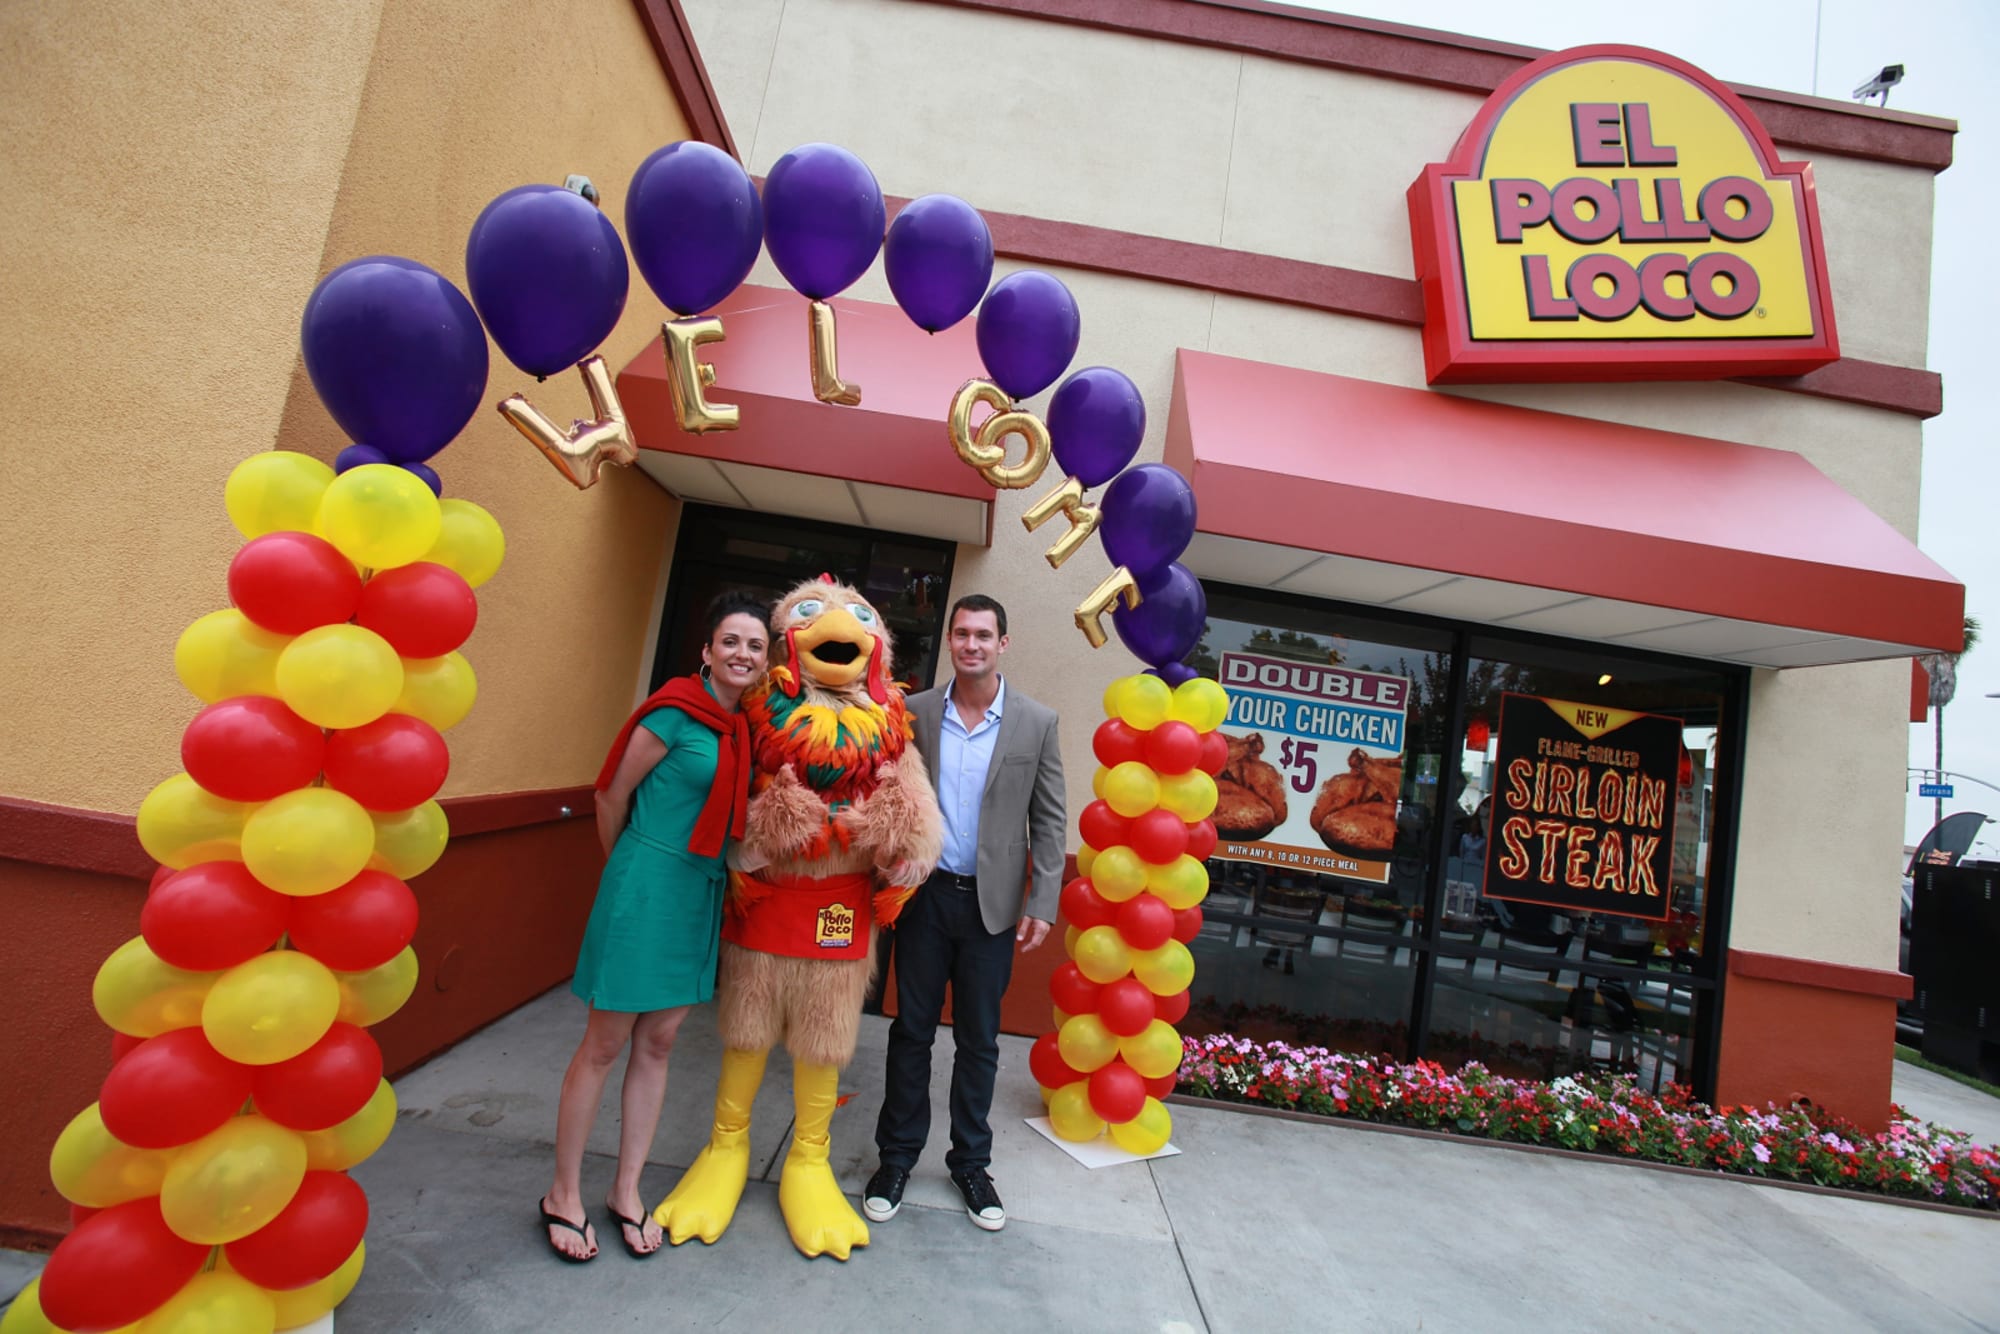 El Pollo Loco Is the chain open on Thanksgiving Day 2020?